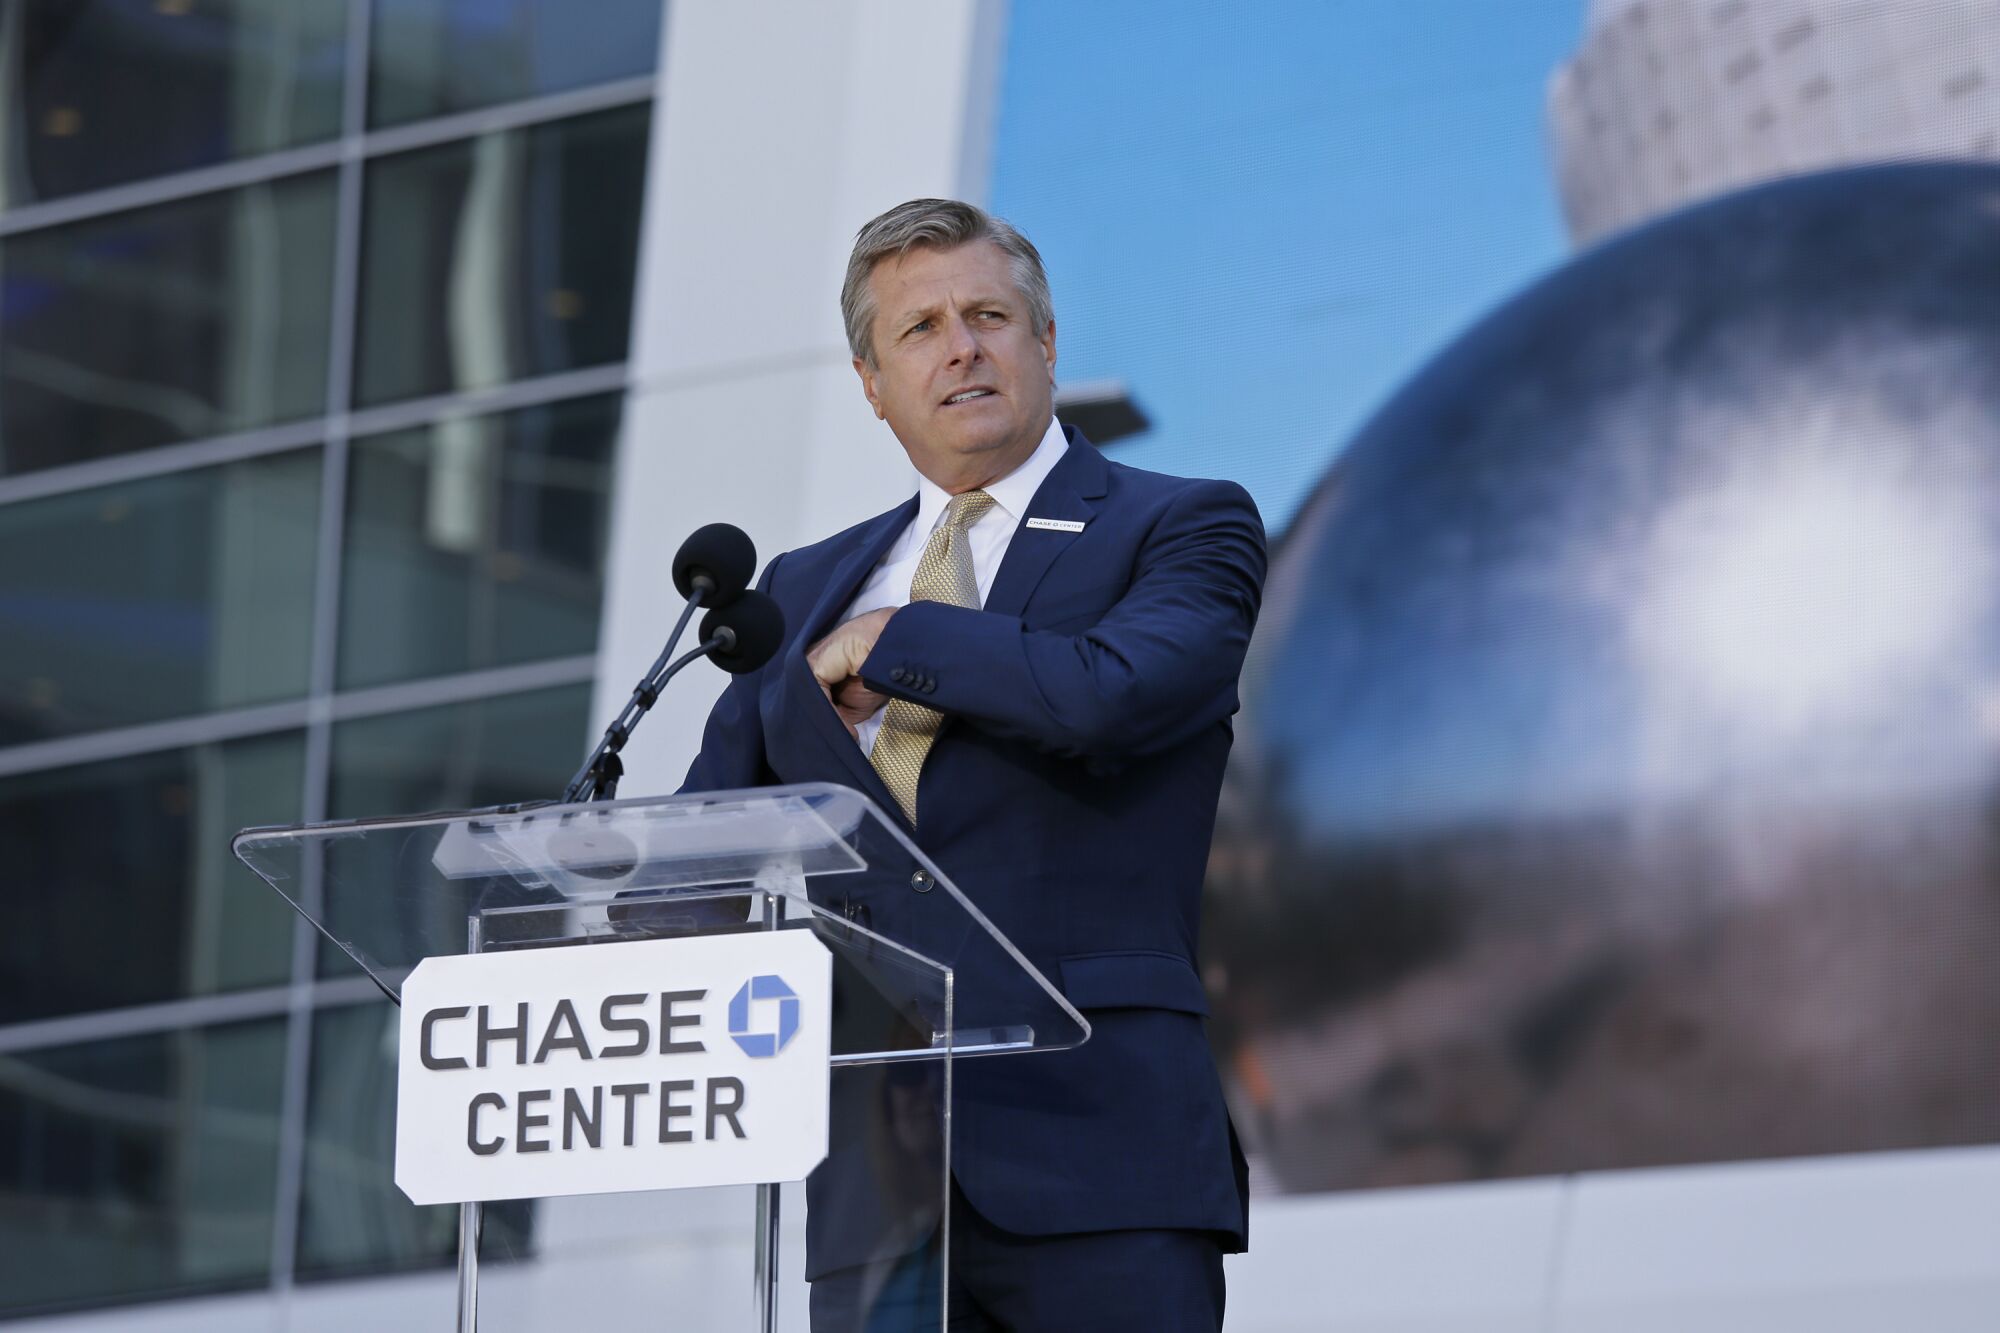 Warriors chief executive and president Rick Welts prepares to speak at the ribbon-cutting ceremony for Chase Center.